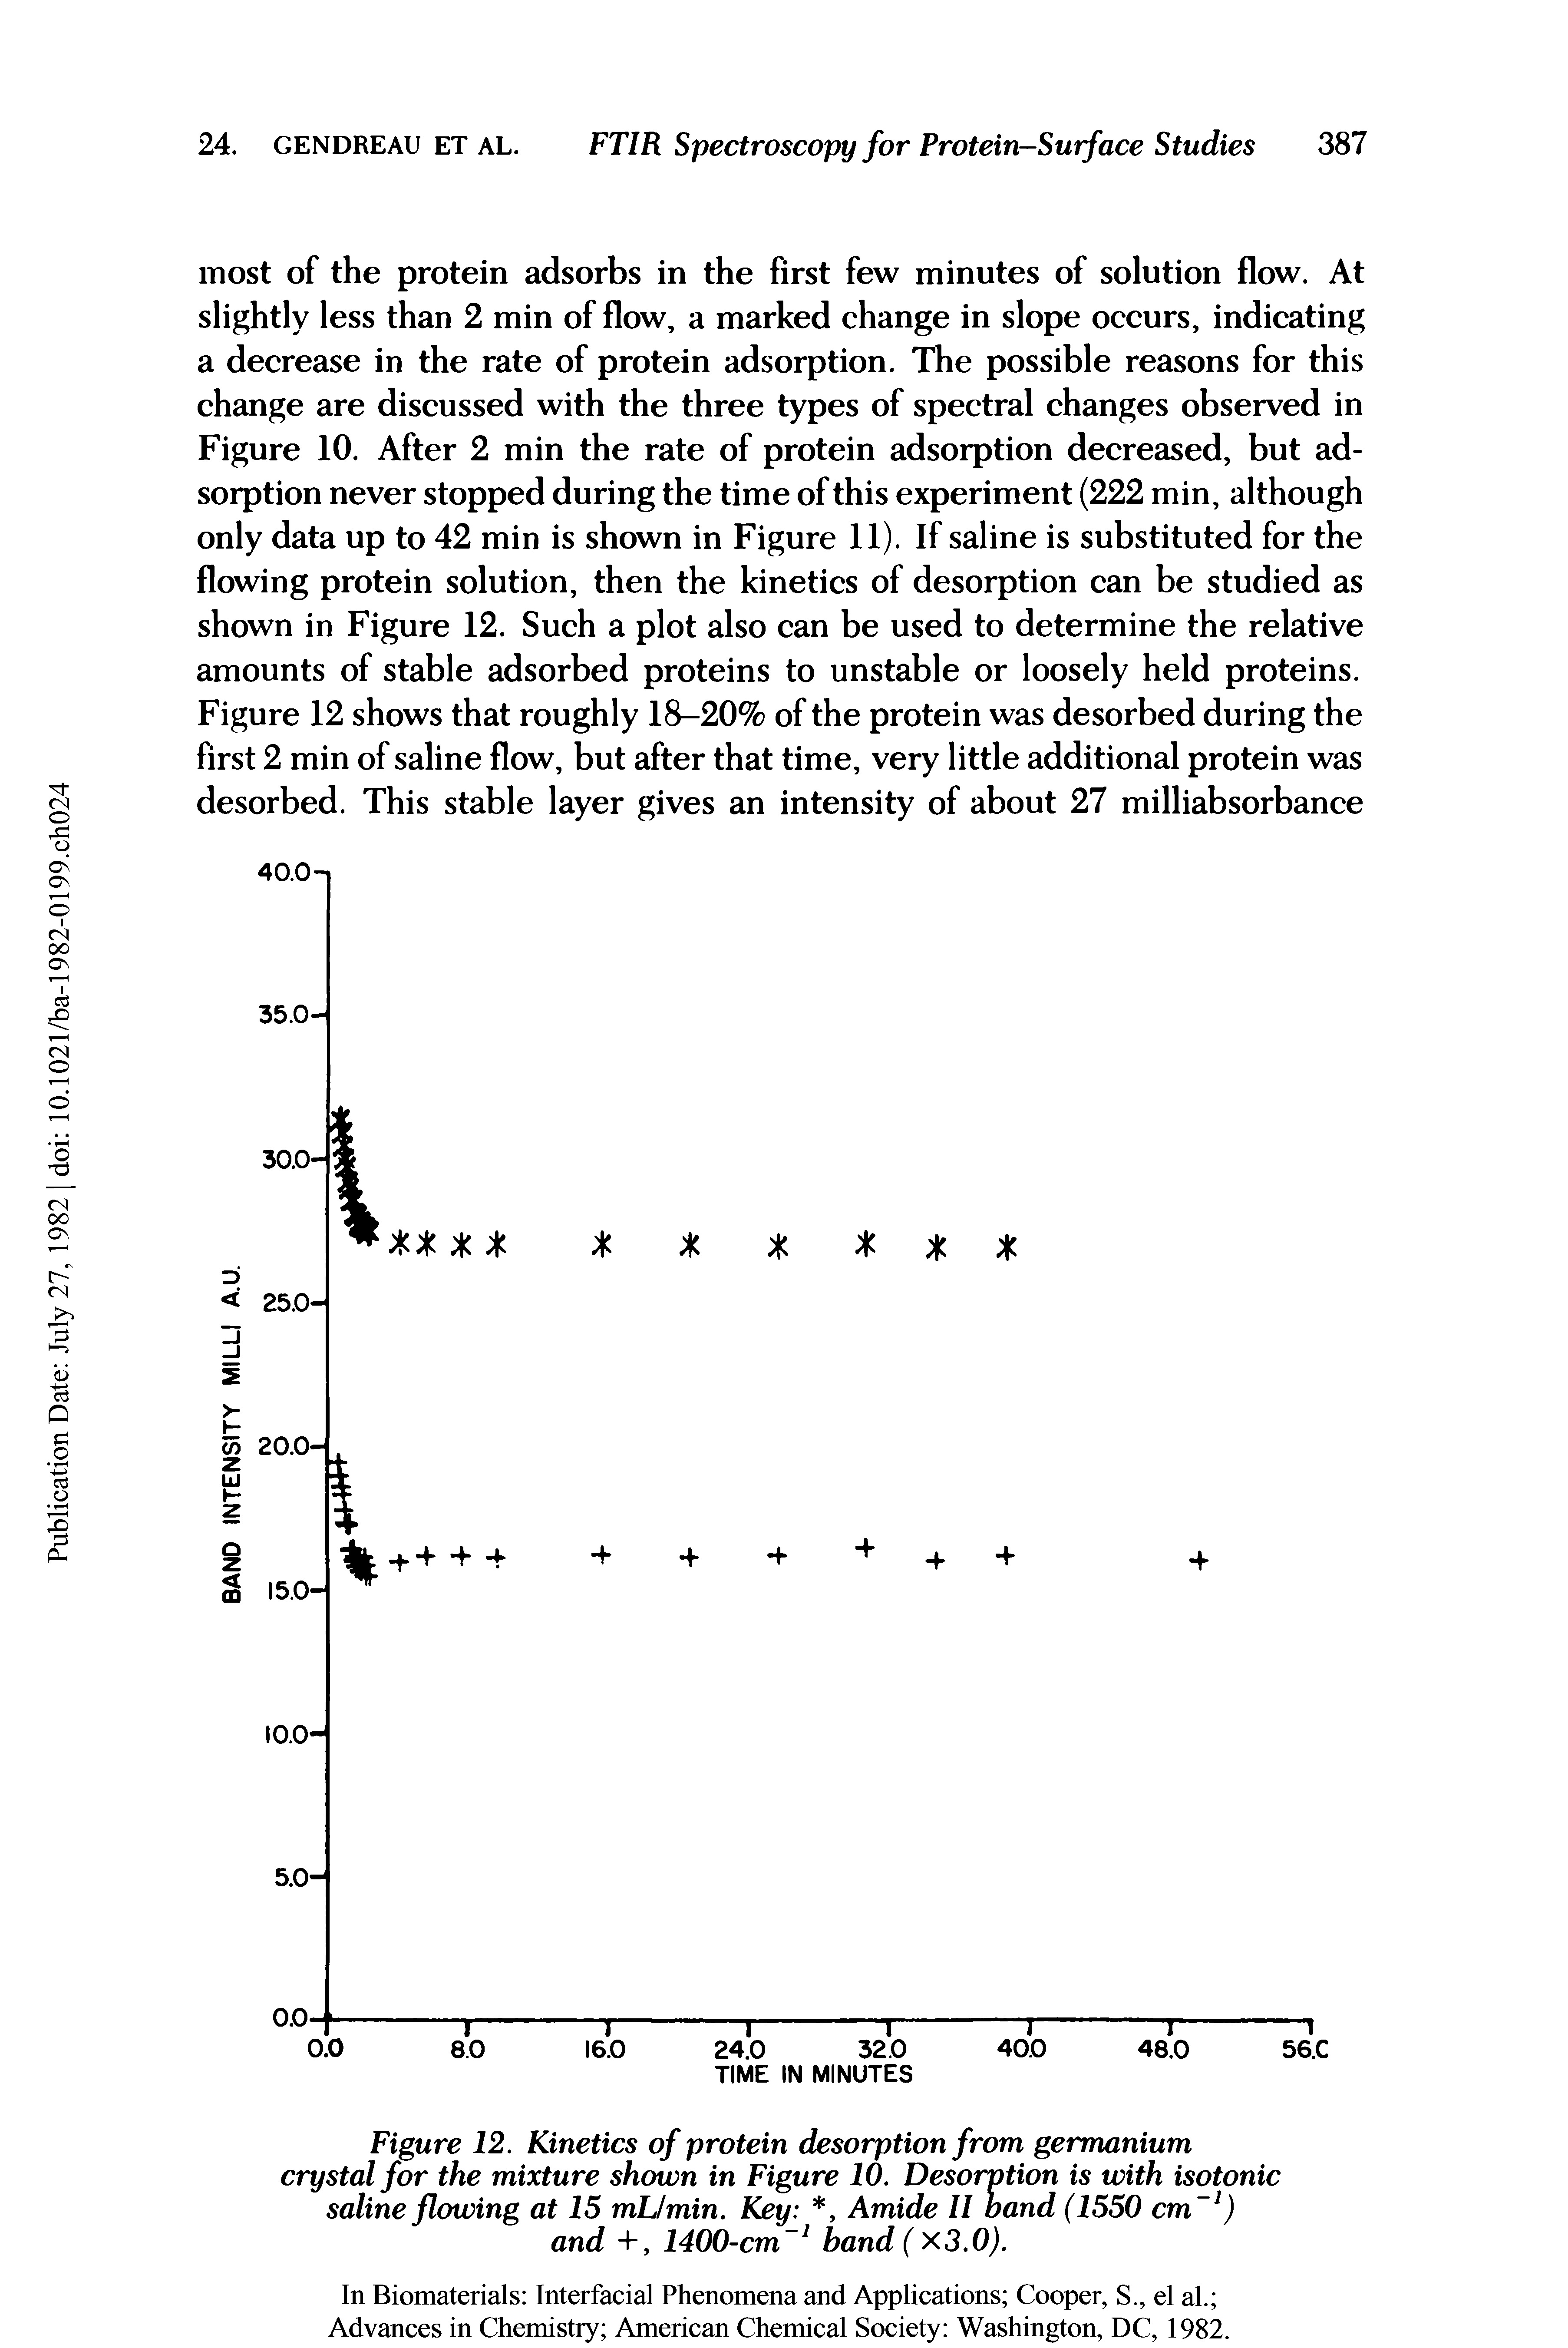 Figure 12. Kinetics of protein desorption from germanium crystal for the mixture shown in Figure 10. Desorption is with isotonic saline flowing at 15 mL/min. Key , Amide 11 band (1550 cm-1) and +, 1400-cmband ( x3.0).